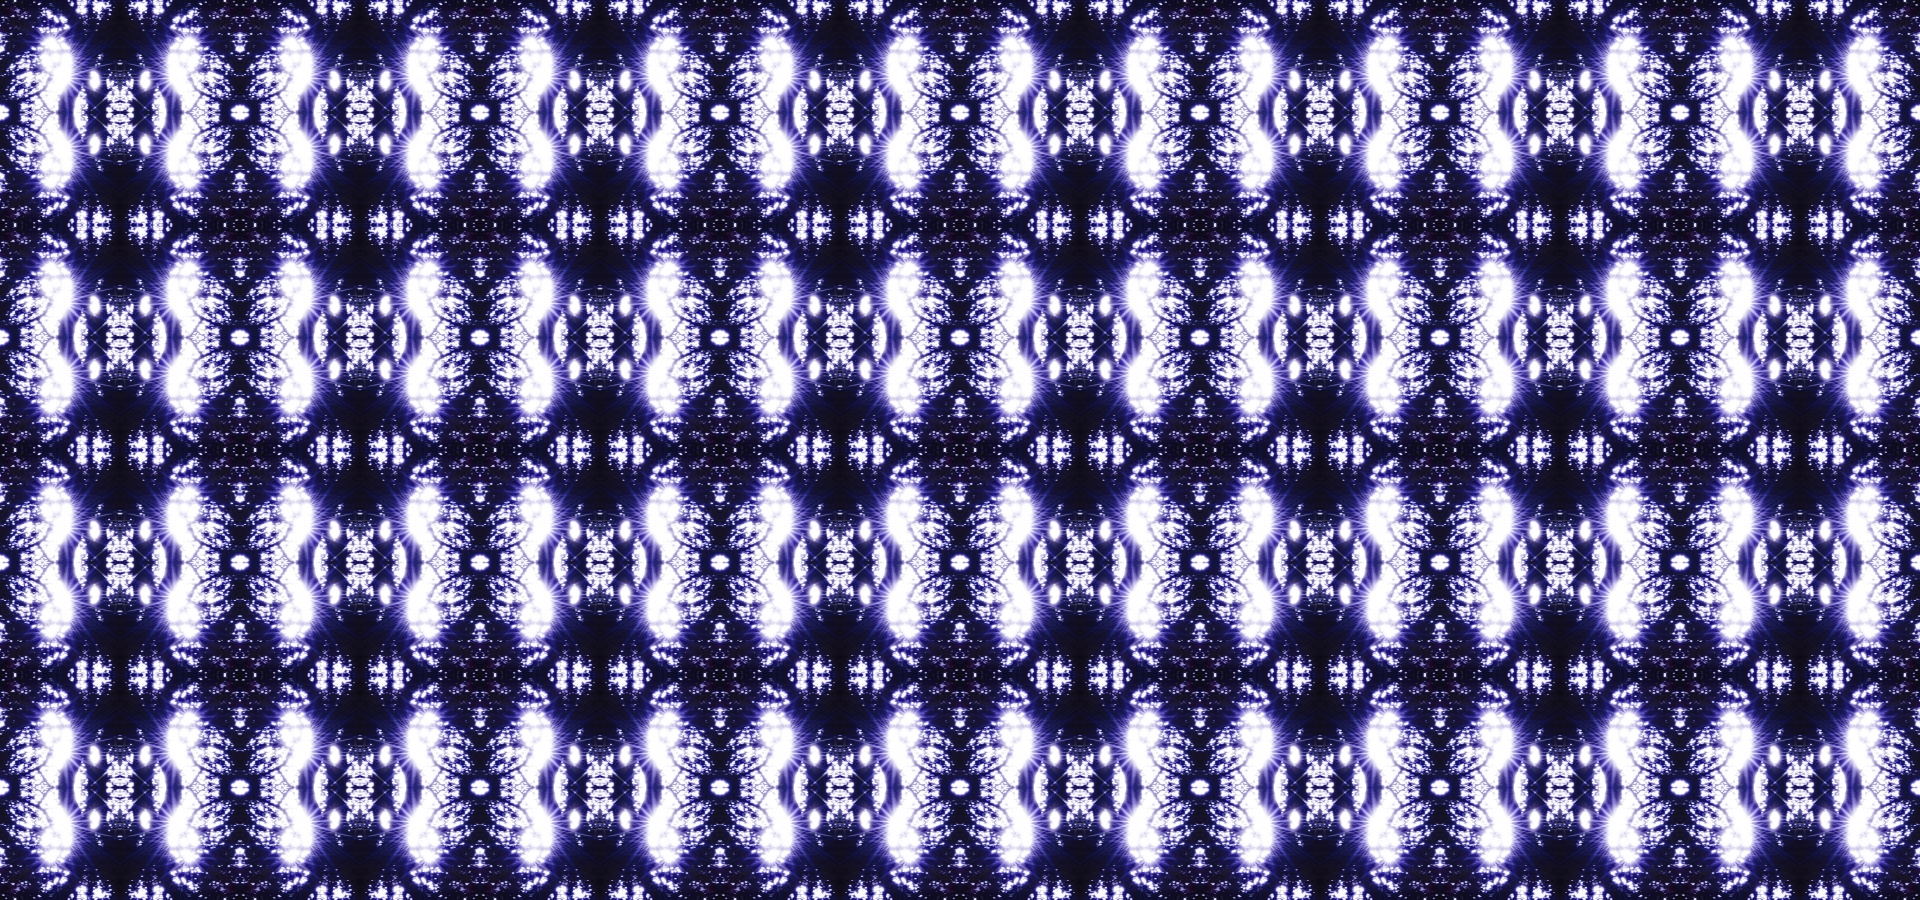 background pattern repeat free photo